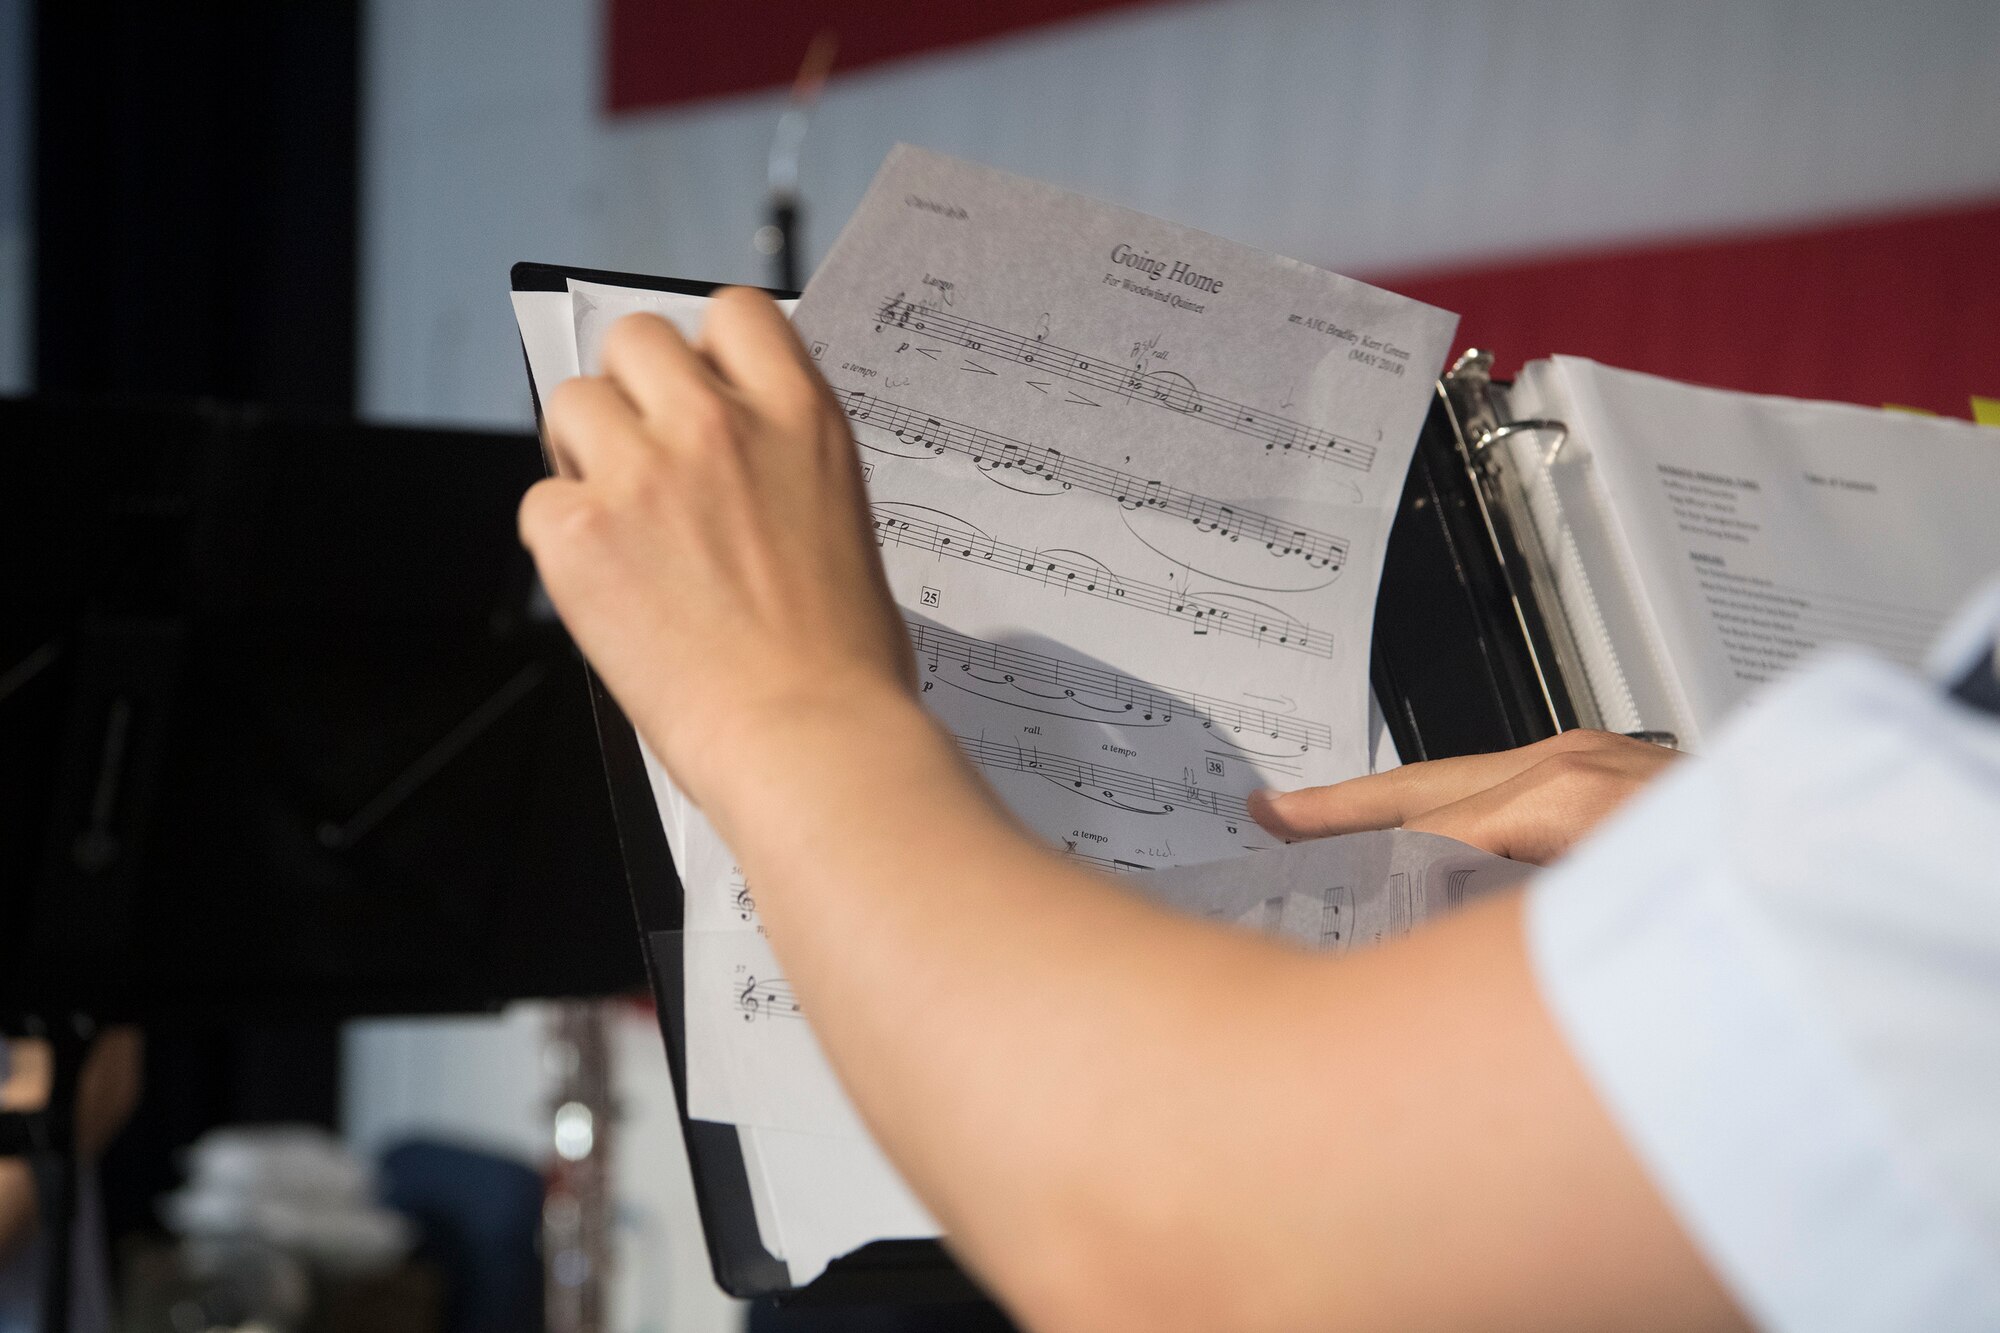 Airman 1st Class Louis Kim, a clarinet player with the U.S. Air Force Heritage Winds, changes his sheet music during a performance June 6th, 2019 in Mount Pleasant, S.C.